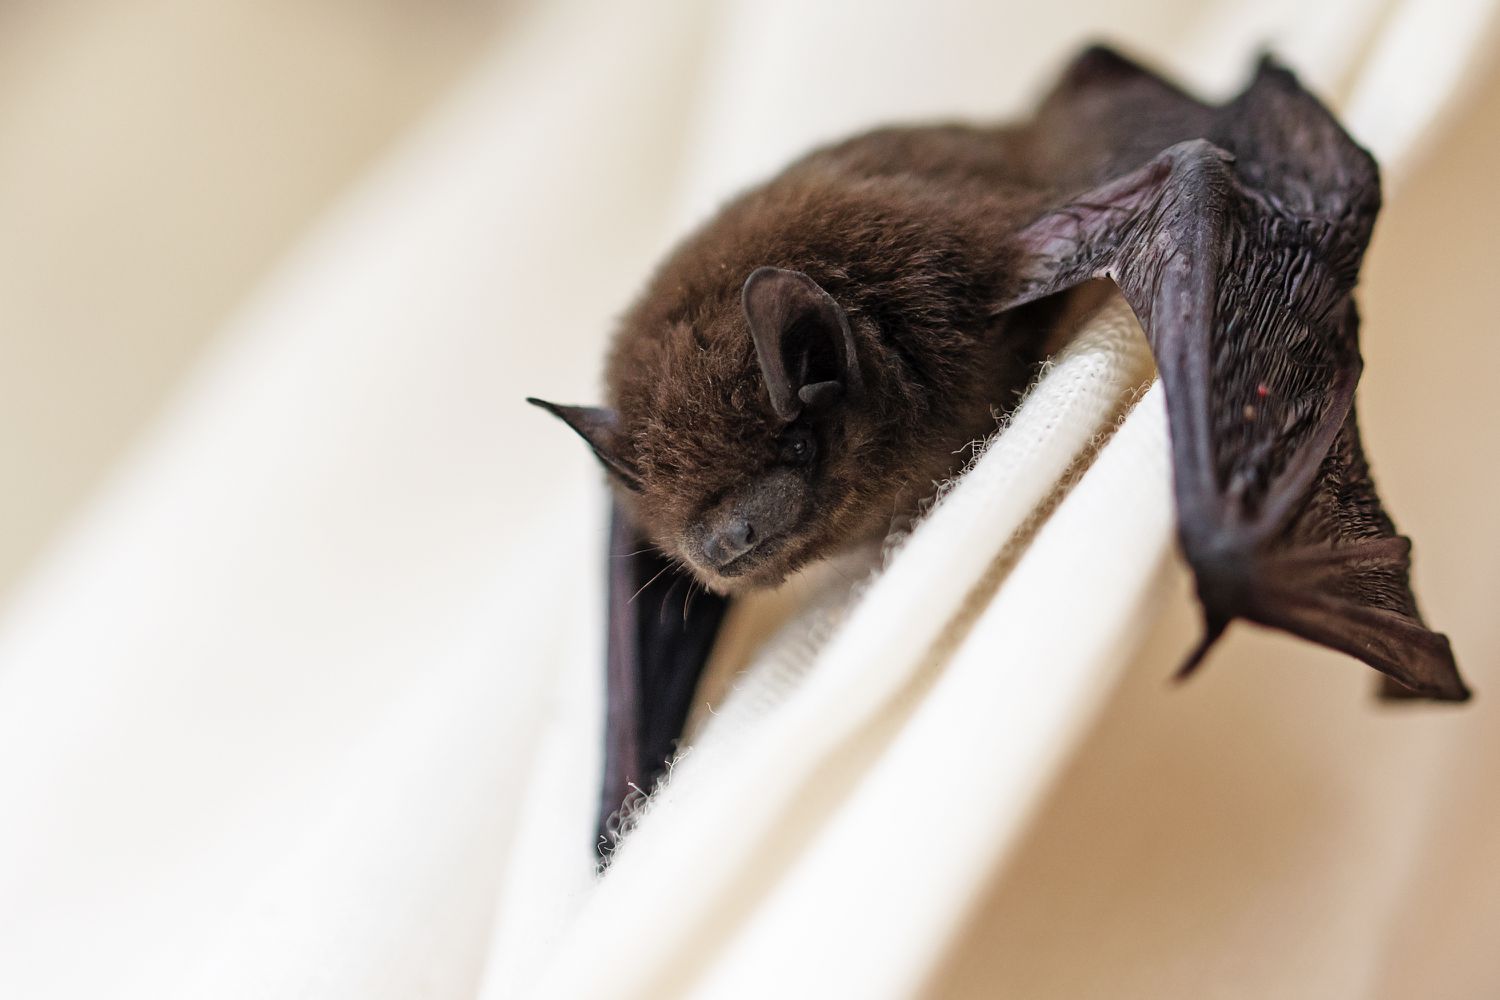 Will a Bat Leave on Its Own